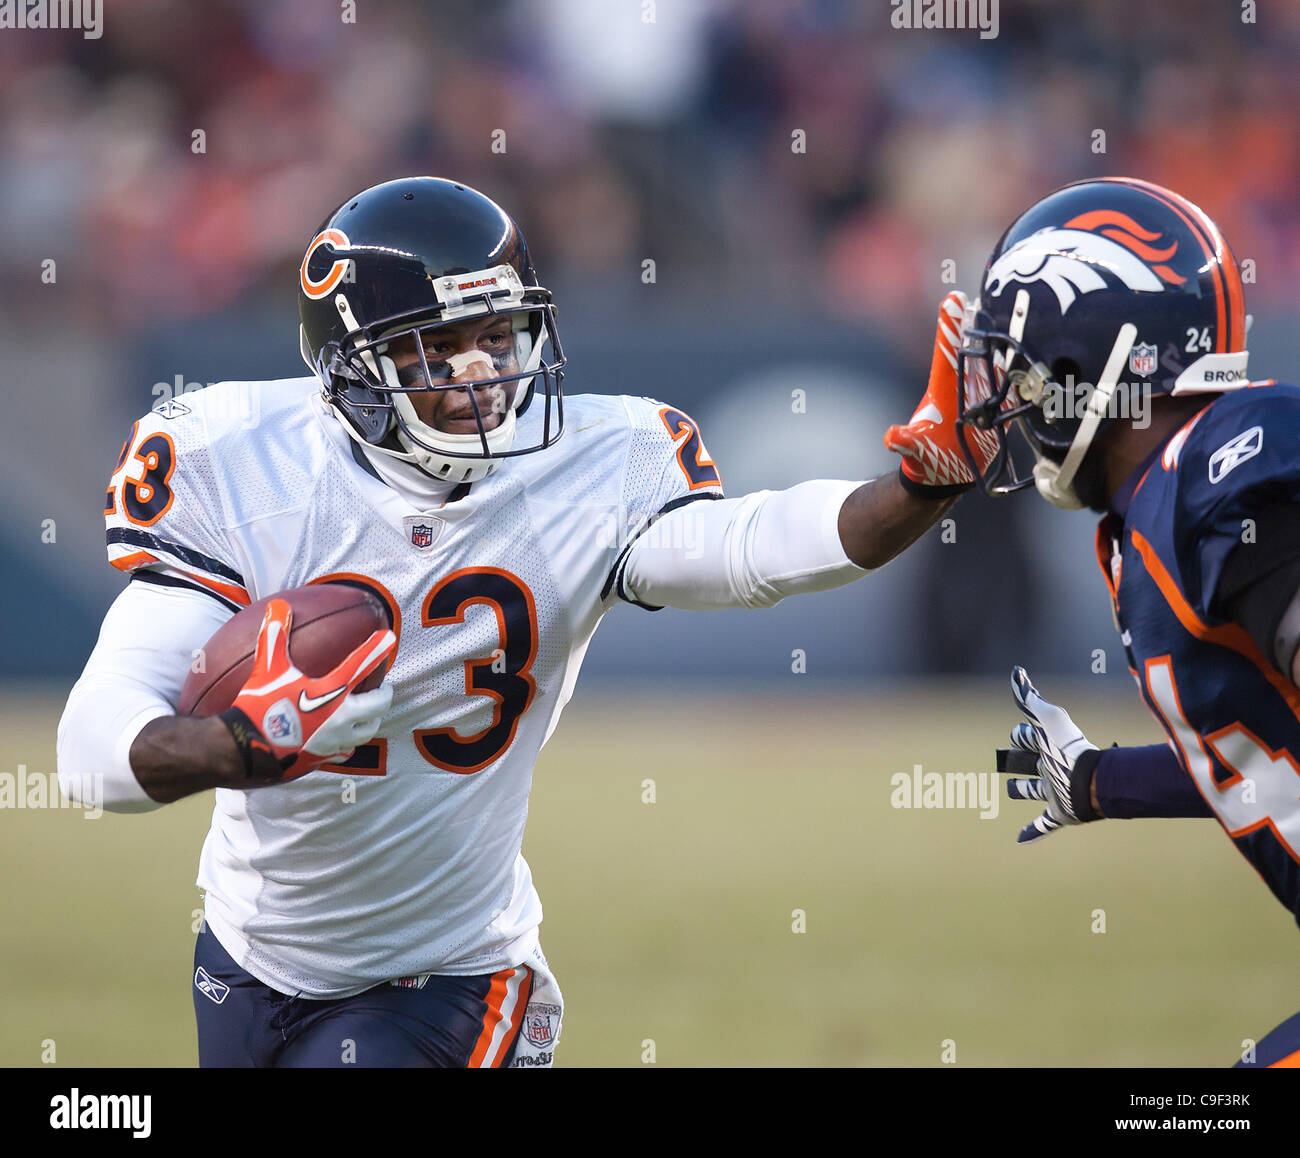 Dec. 11, 2011 - Denver, Colorado, U.S - Chicago Bears DEVIN HESTER, left, returns a punt for yardage against Denver Broncos CB CHAMP BAILEY, right, during the 3rd. quarter at Sports Authority Field at Mile High Sunday afternoon. The Broncos beat the Bears in OT 13-10. (Credit Image: © Hector Acevedo Stock Photo